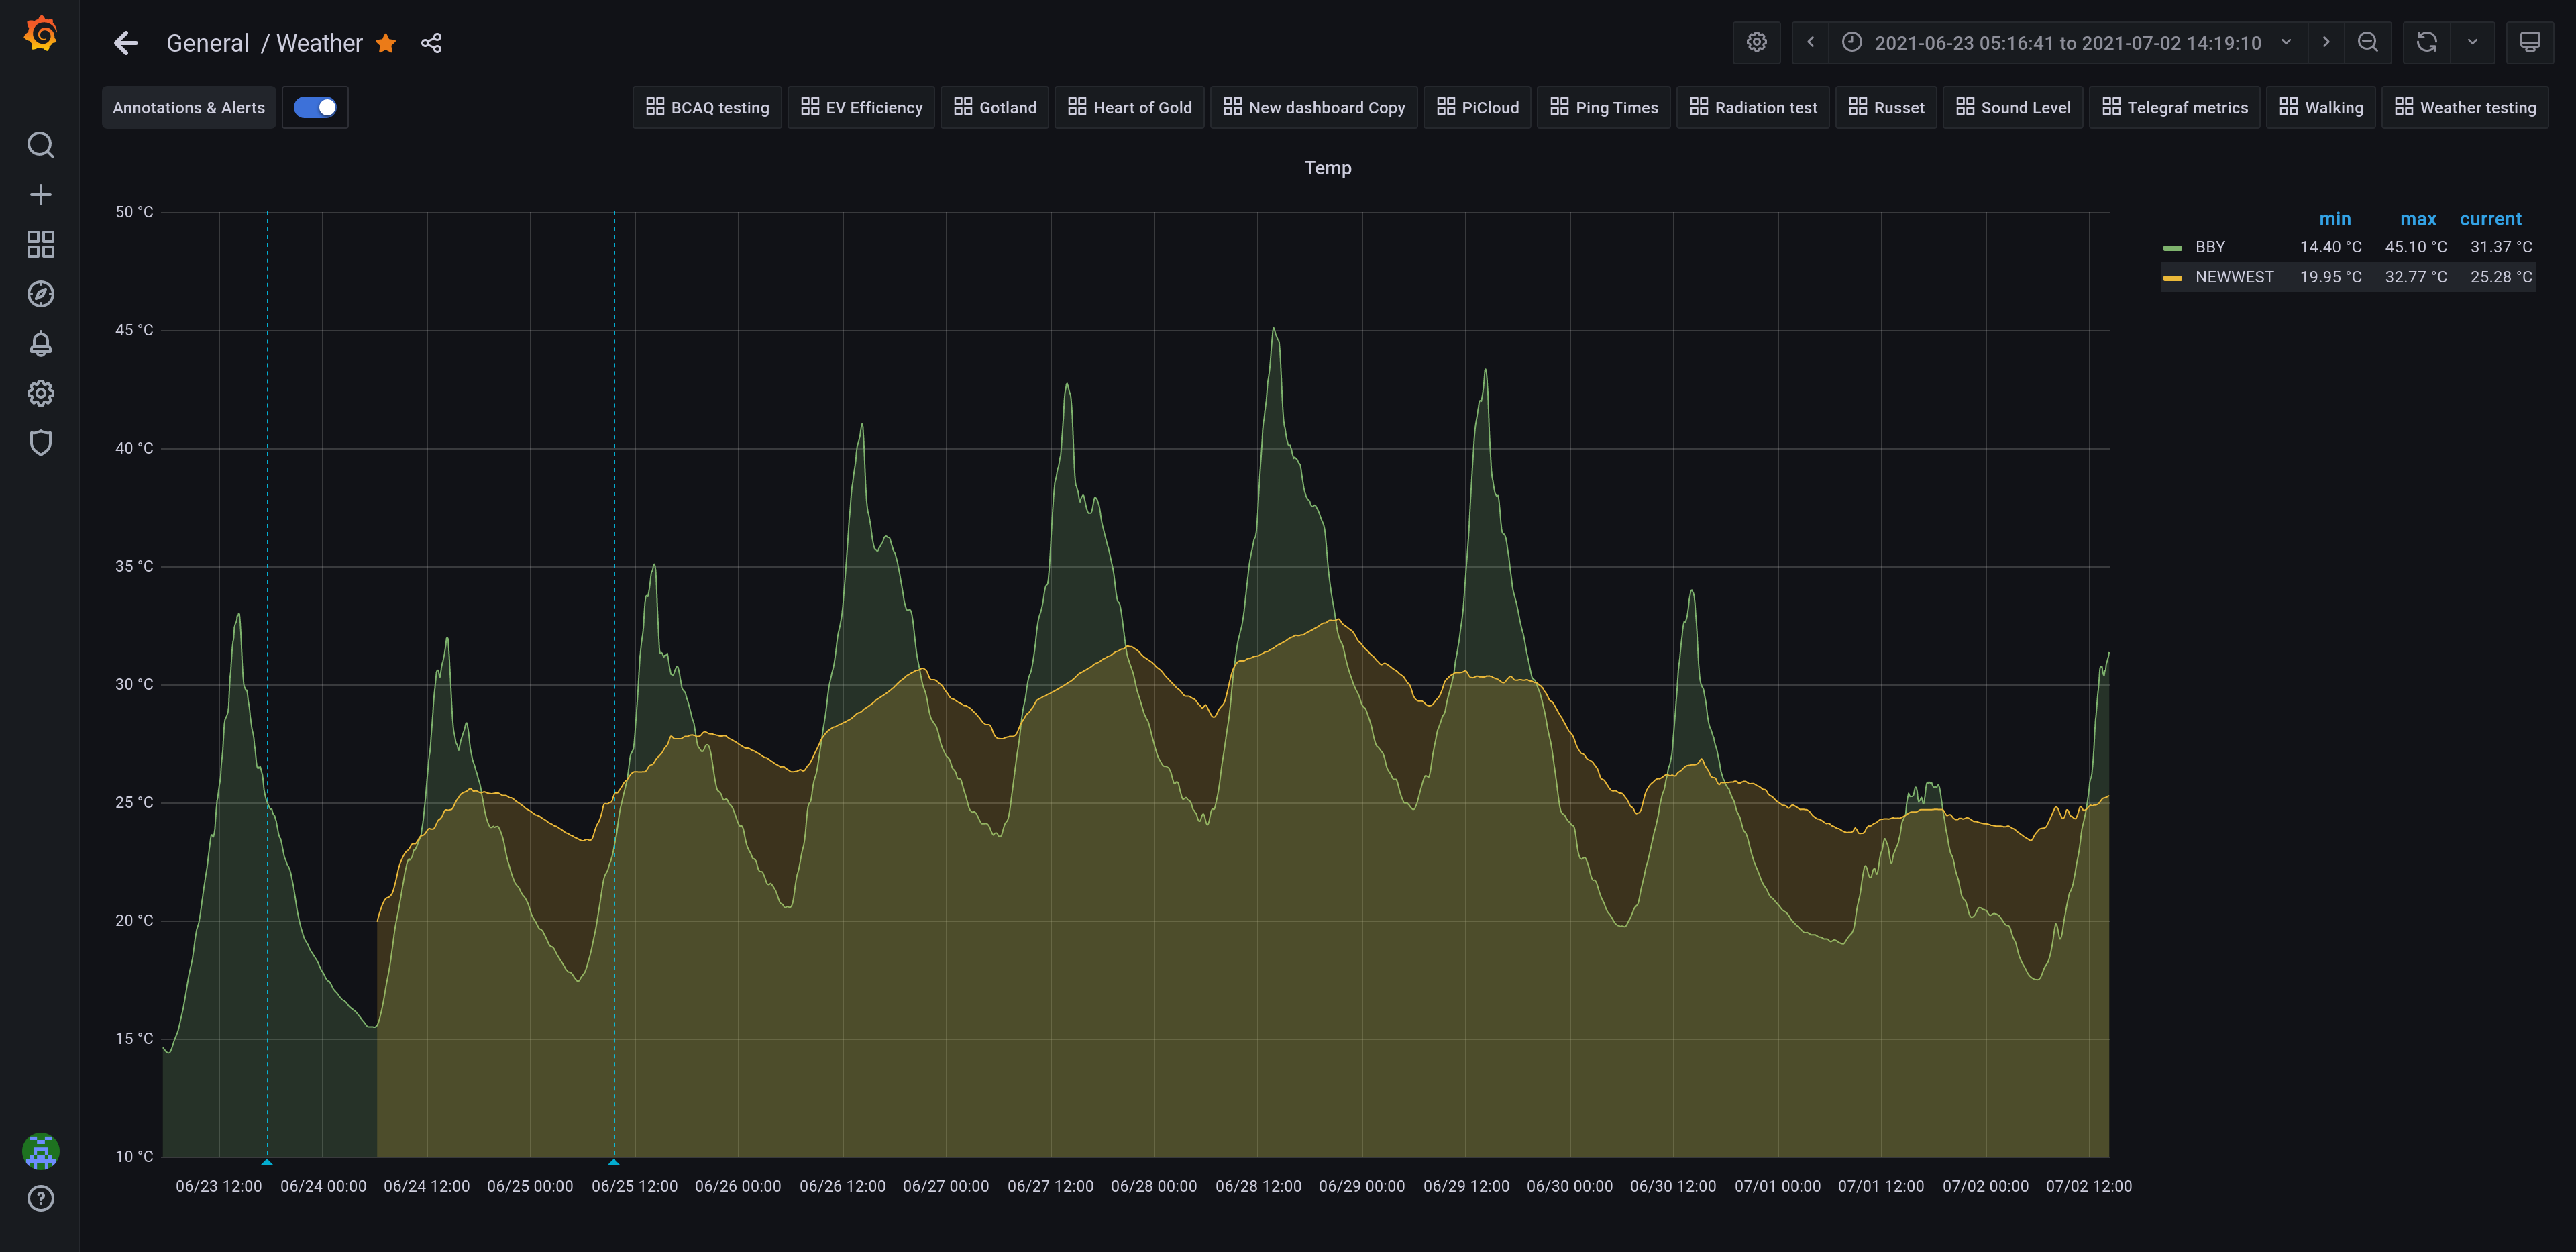 Grafana temperature graph for August 2021 heat wave